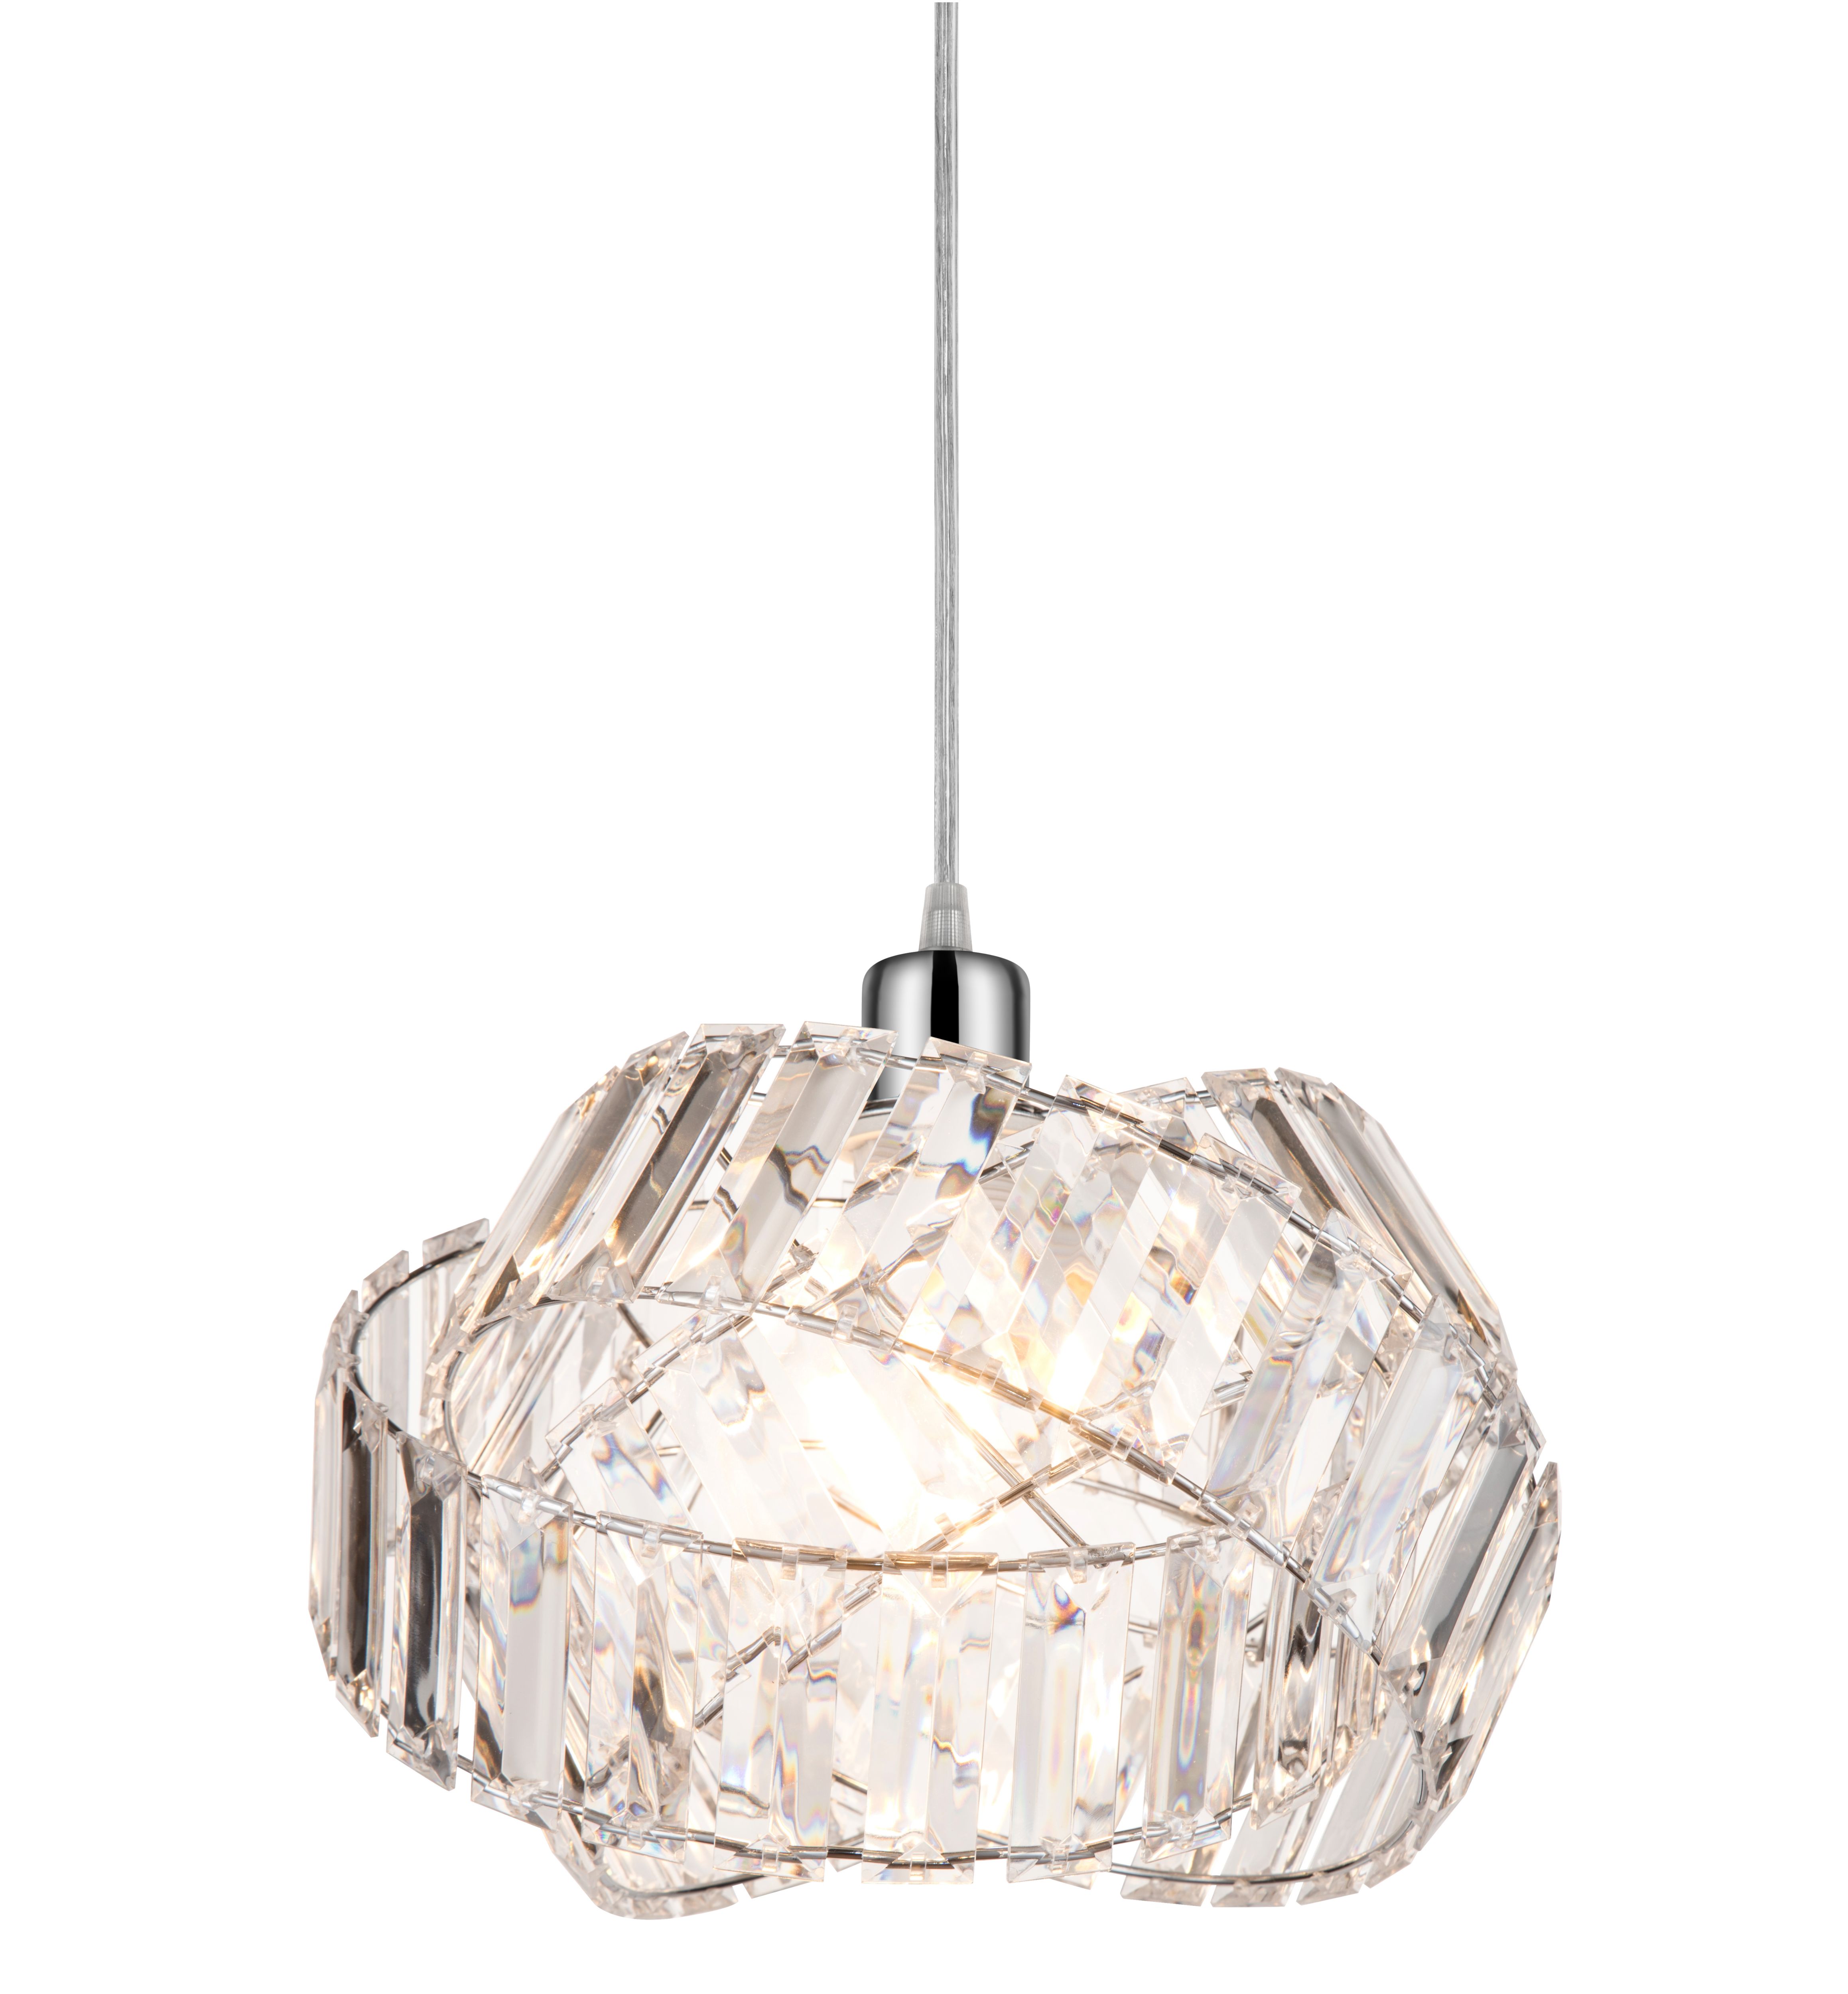 GoodHome Loddon Clear Chrome effect Round Crystal Lamp shade (D)30cm